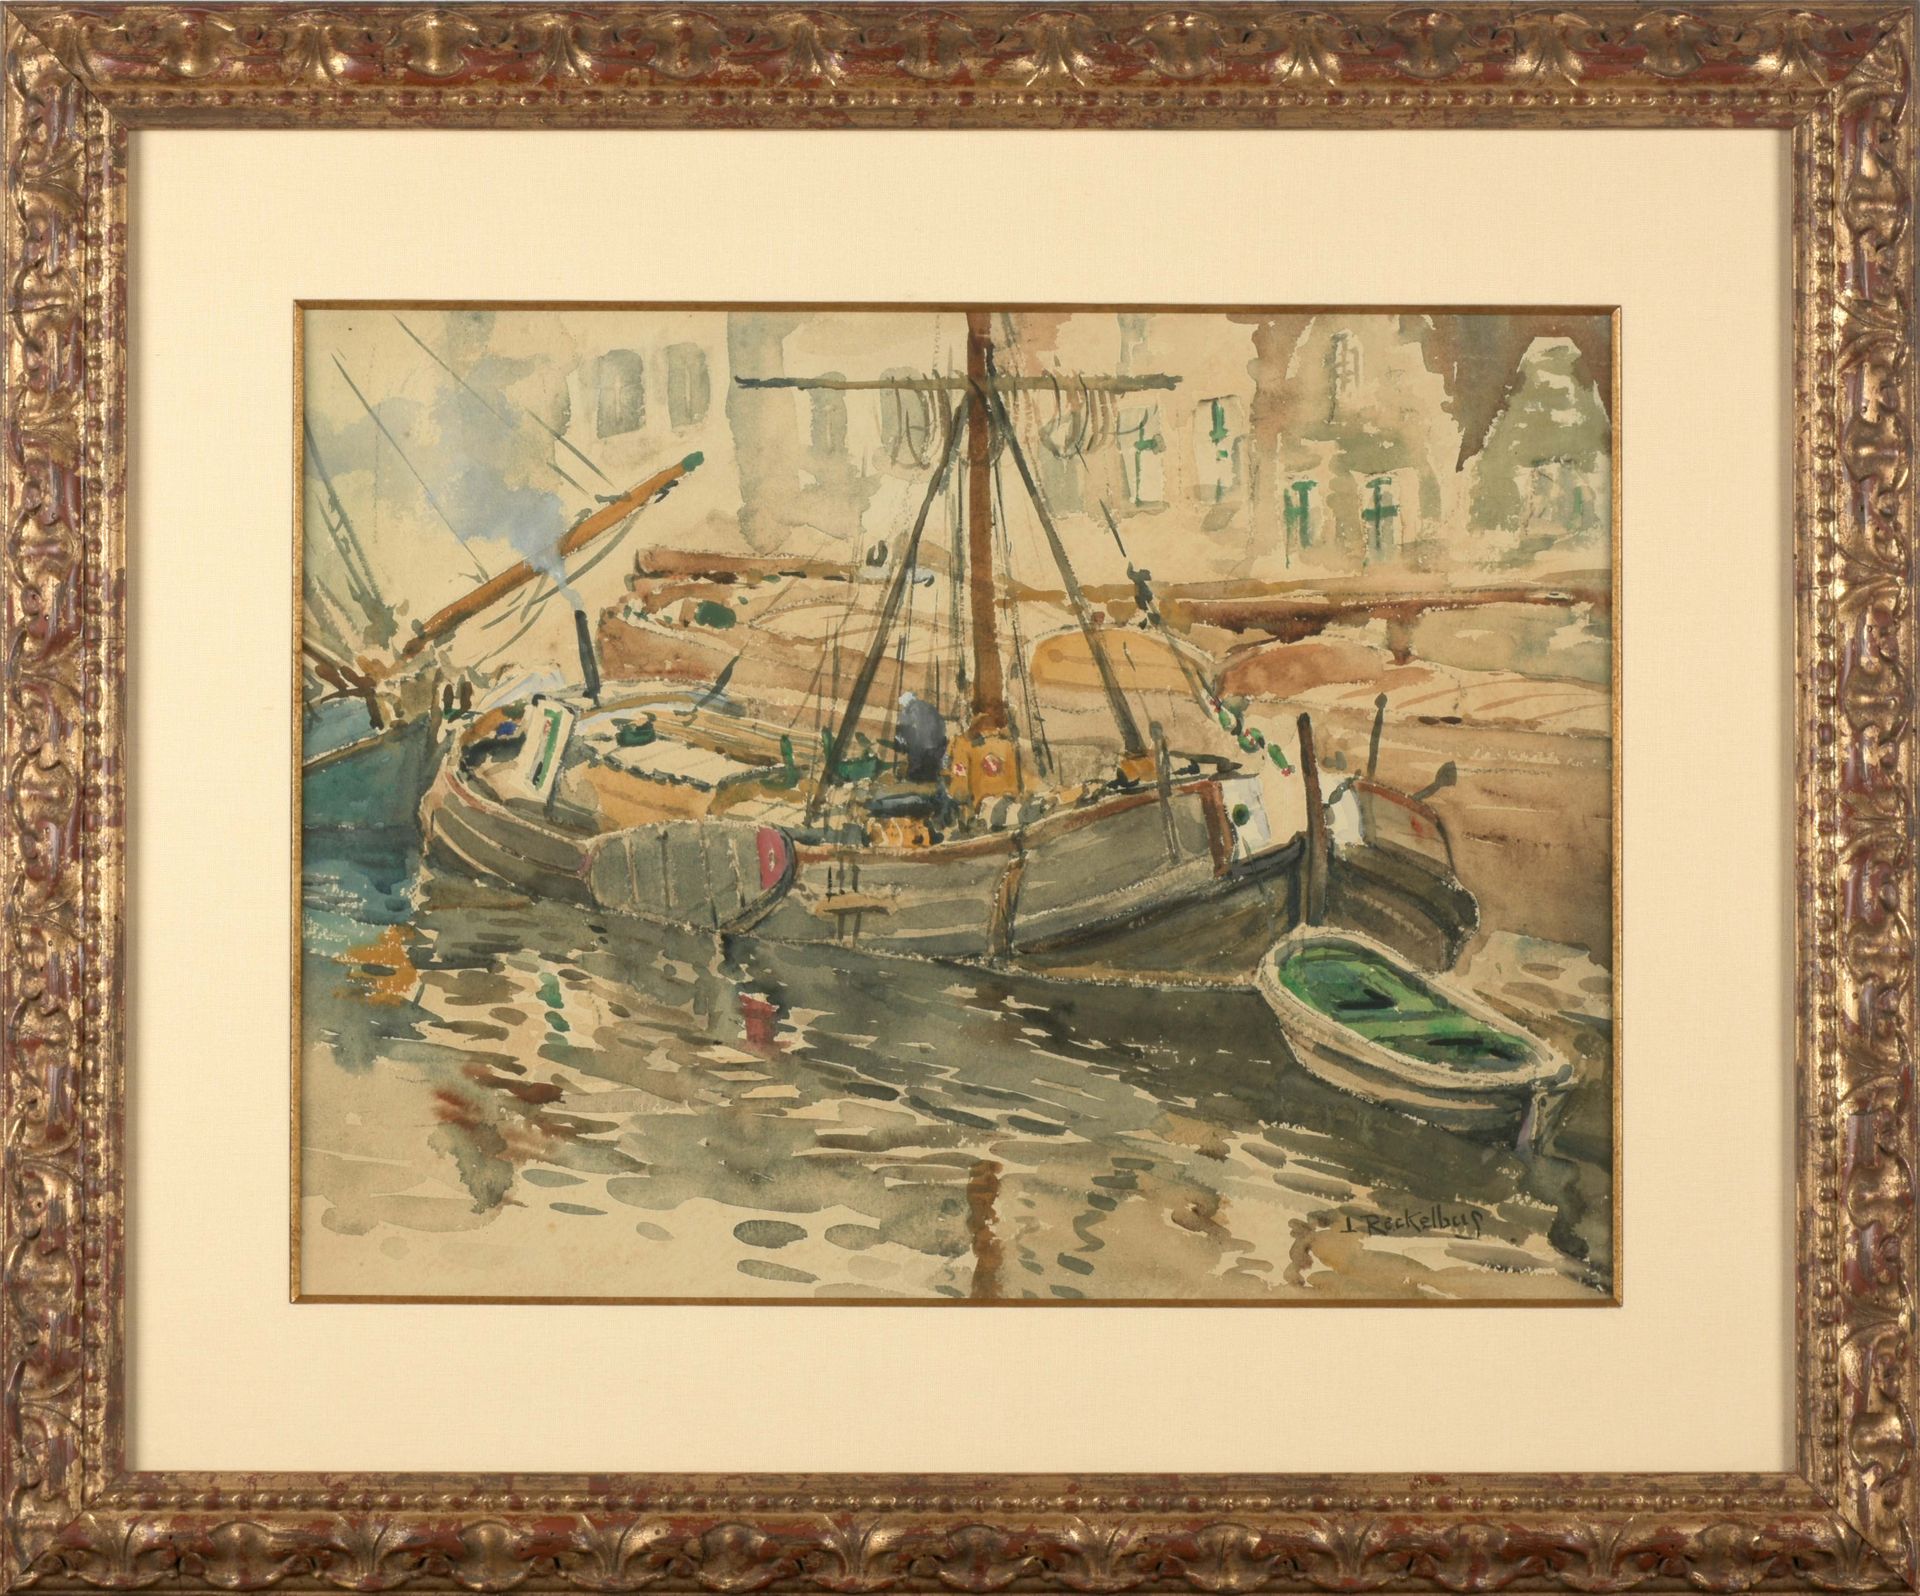 RECKELBUS, Louis (1864-1958) Canal in Bruges with boats

Watercolour (36 x 48 cm&hellip;